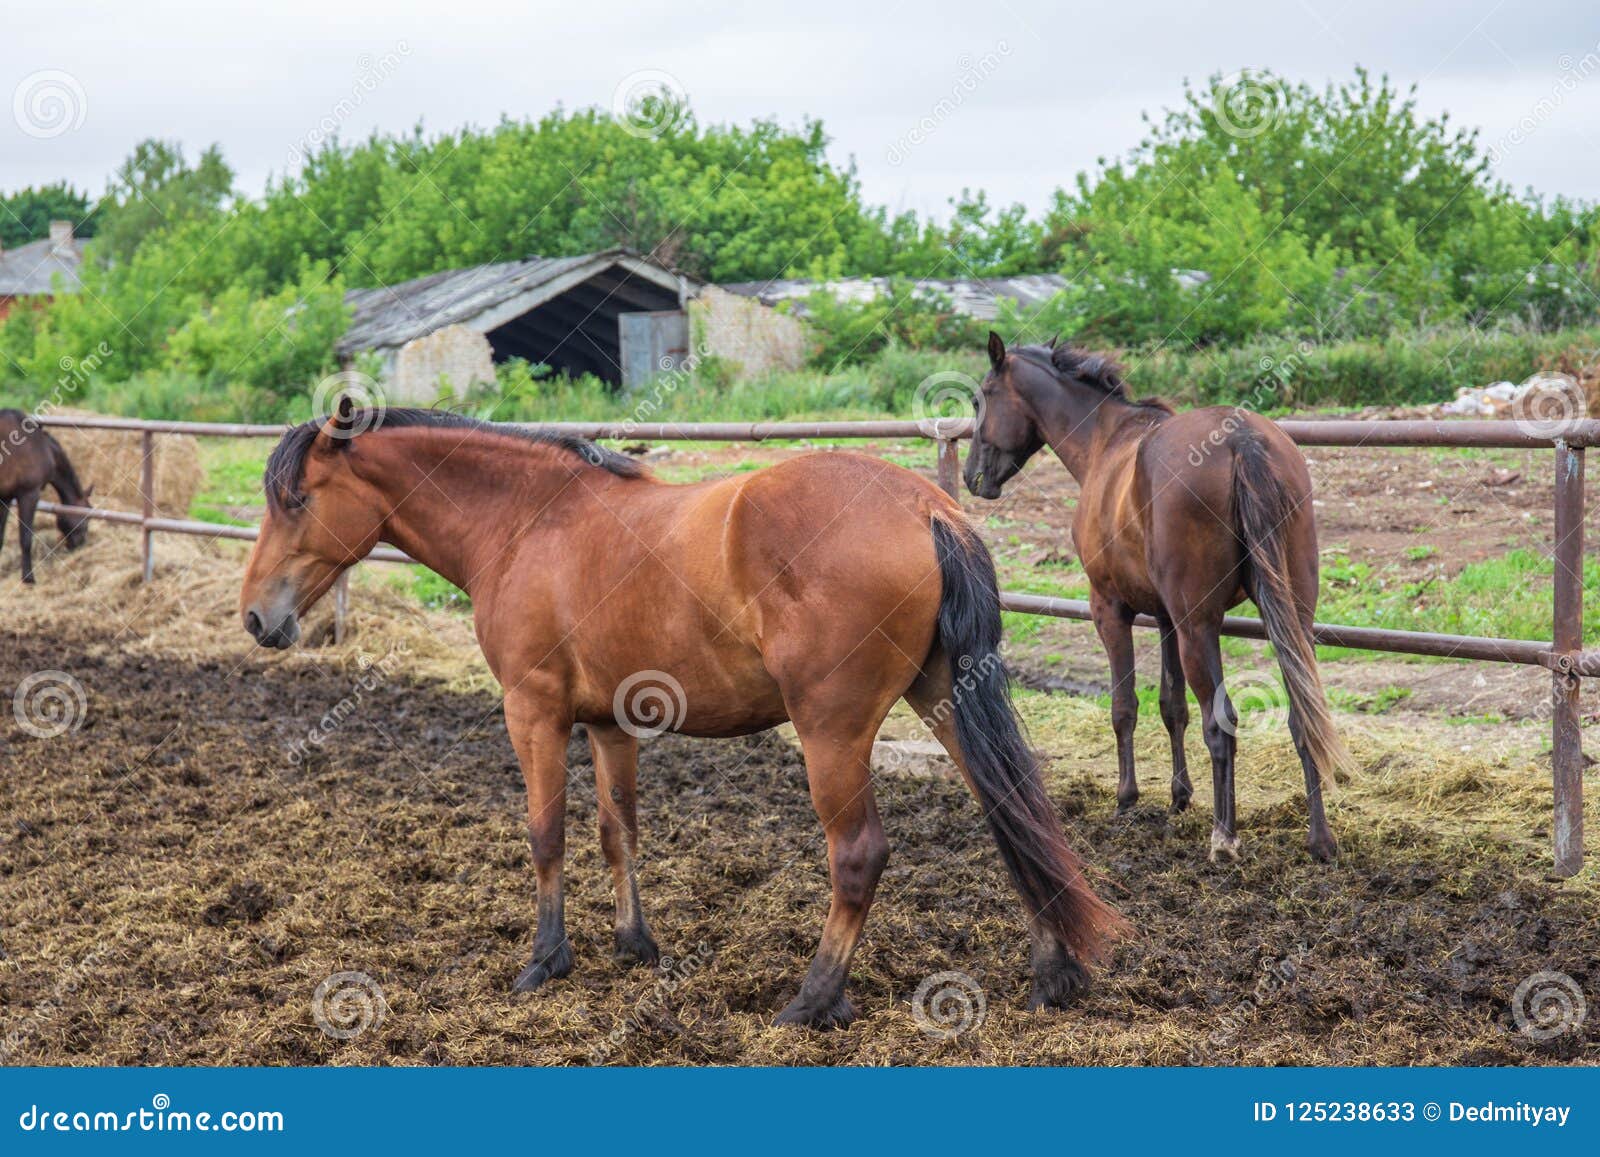 Group of Beautiful Young Horses on Pasture in Animal Farm or Ranch, Rural  Livestock or Farmland Stock Image - Image of fence, animals: 125238633